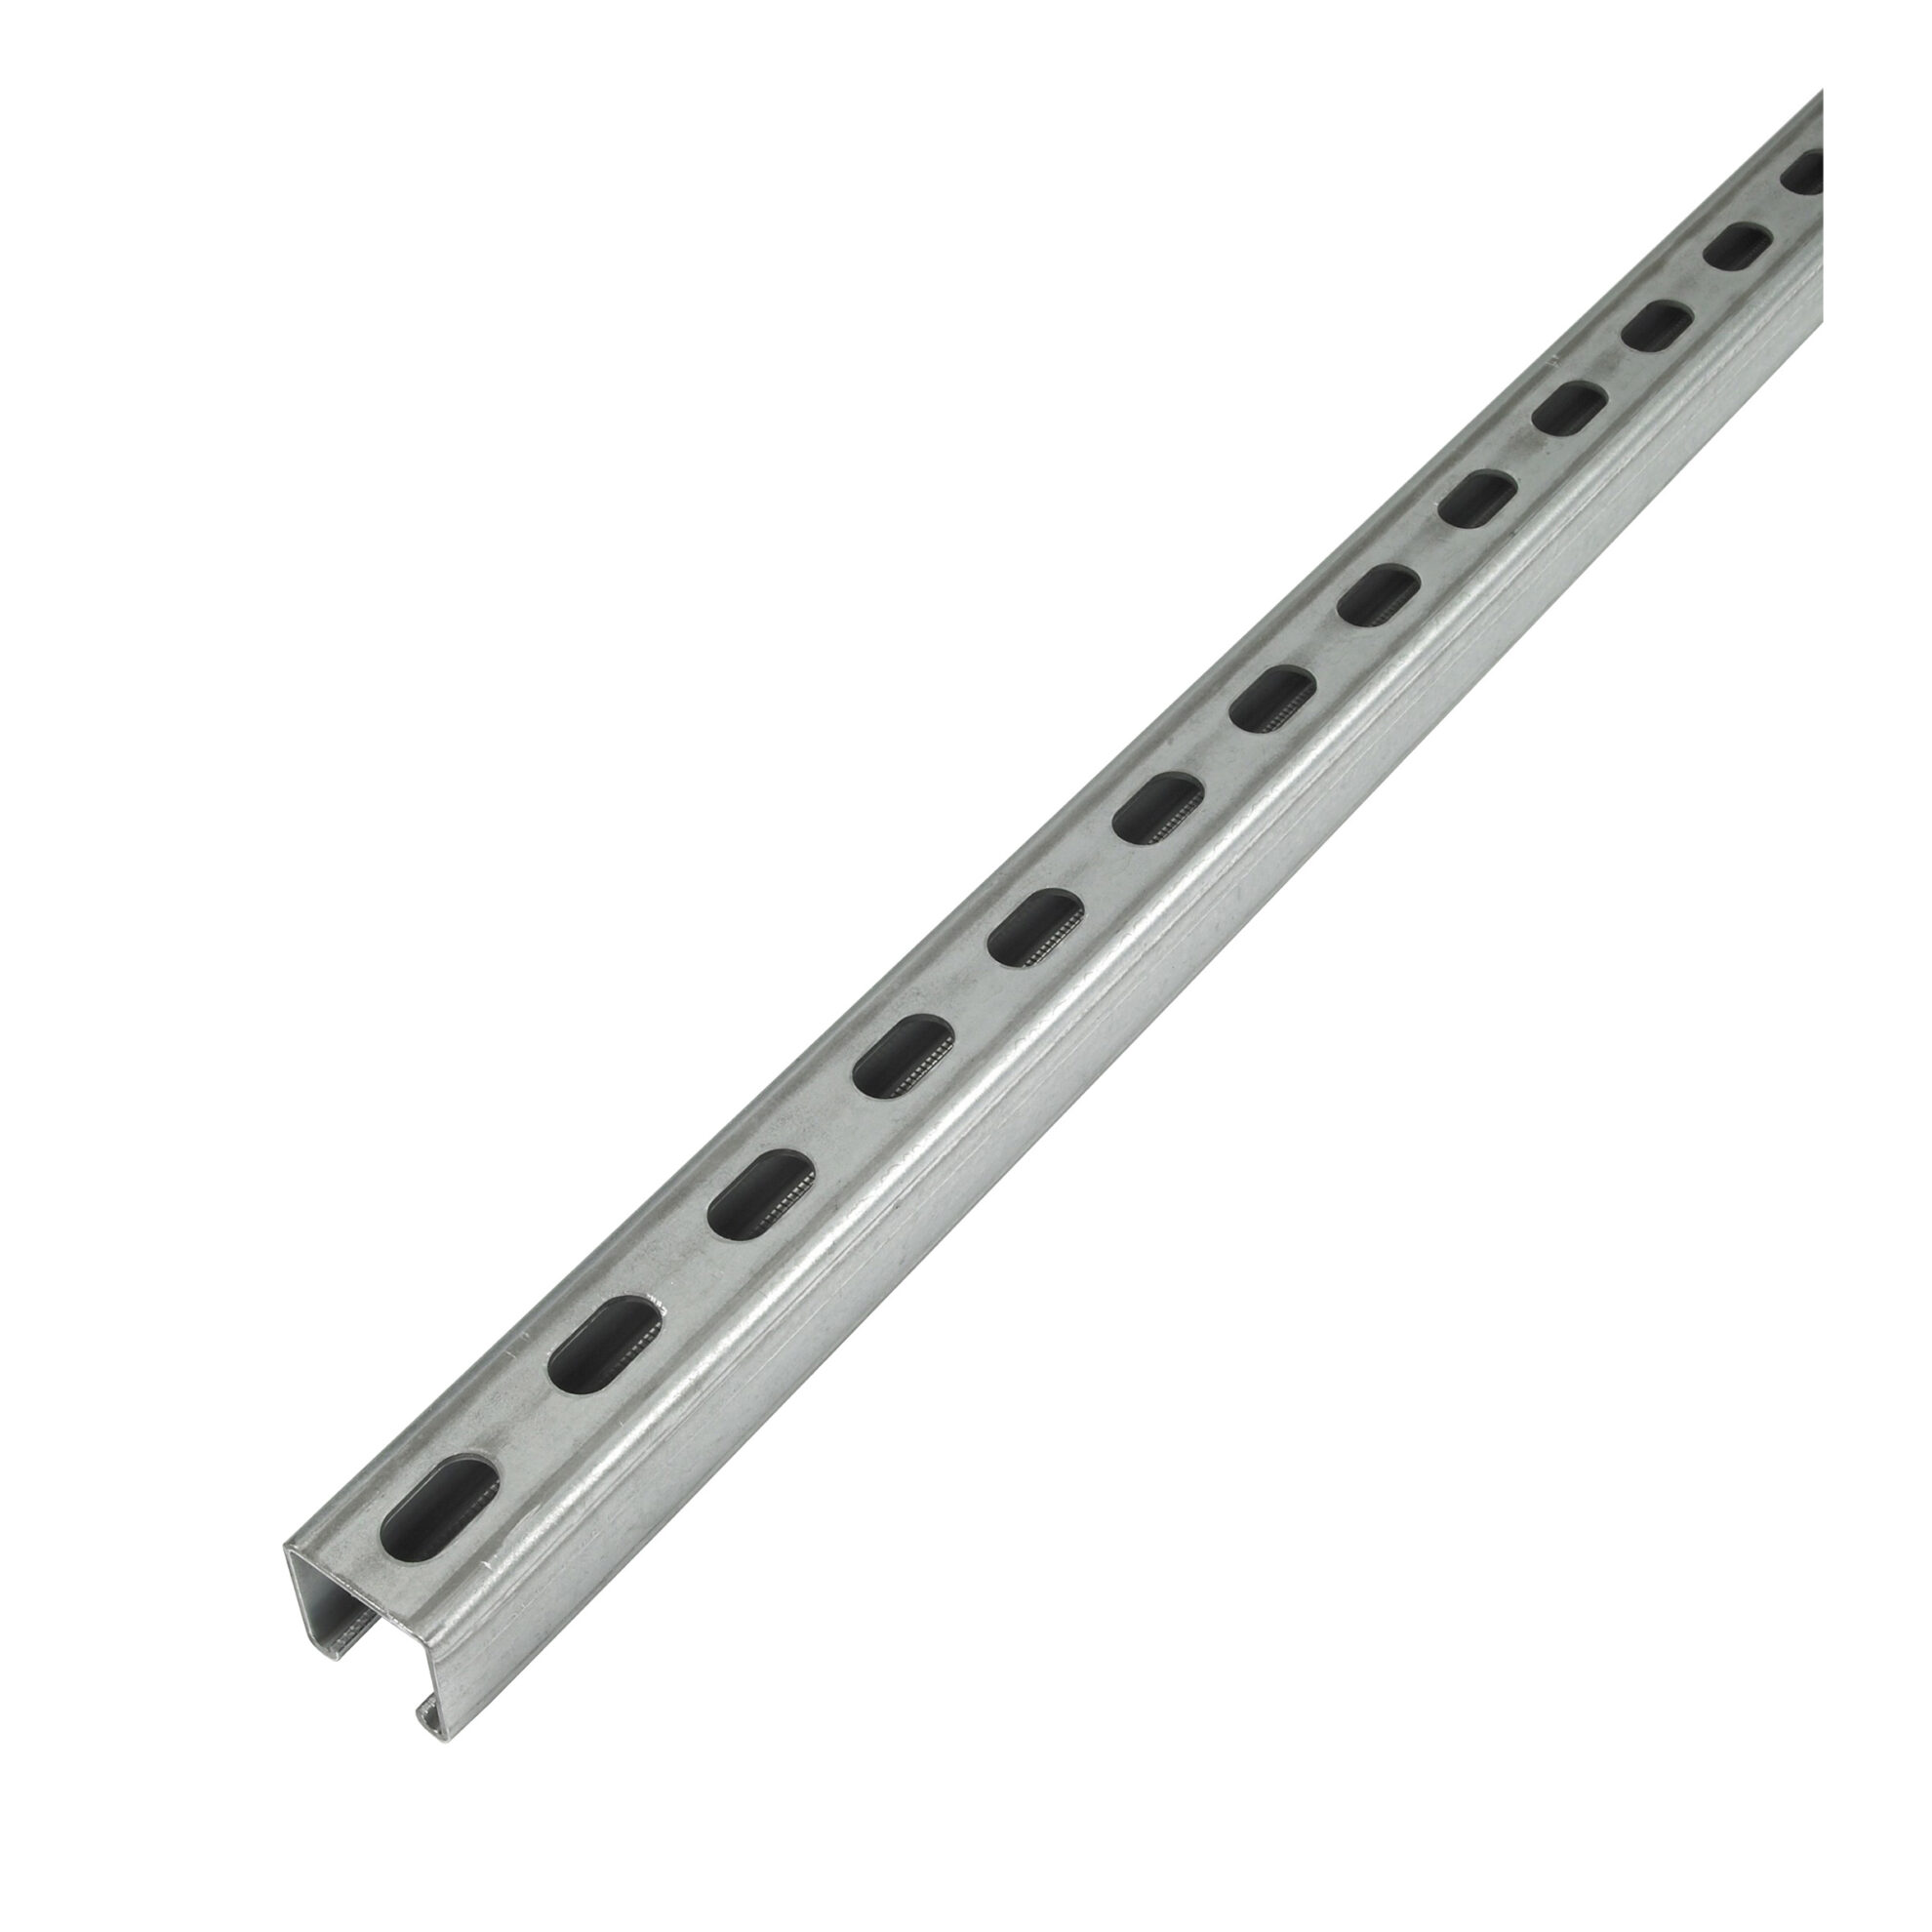 Unistrut P Channel Slotted Hot Dip Galvanised M X Mm X Mm